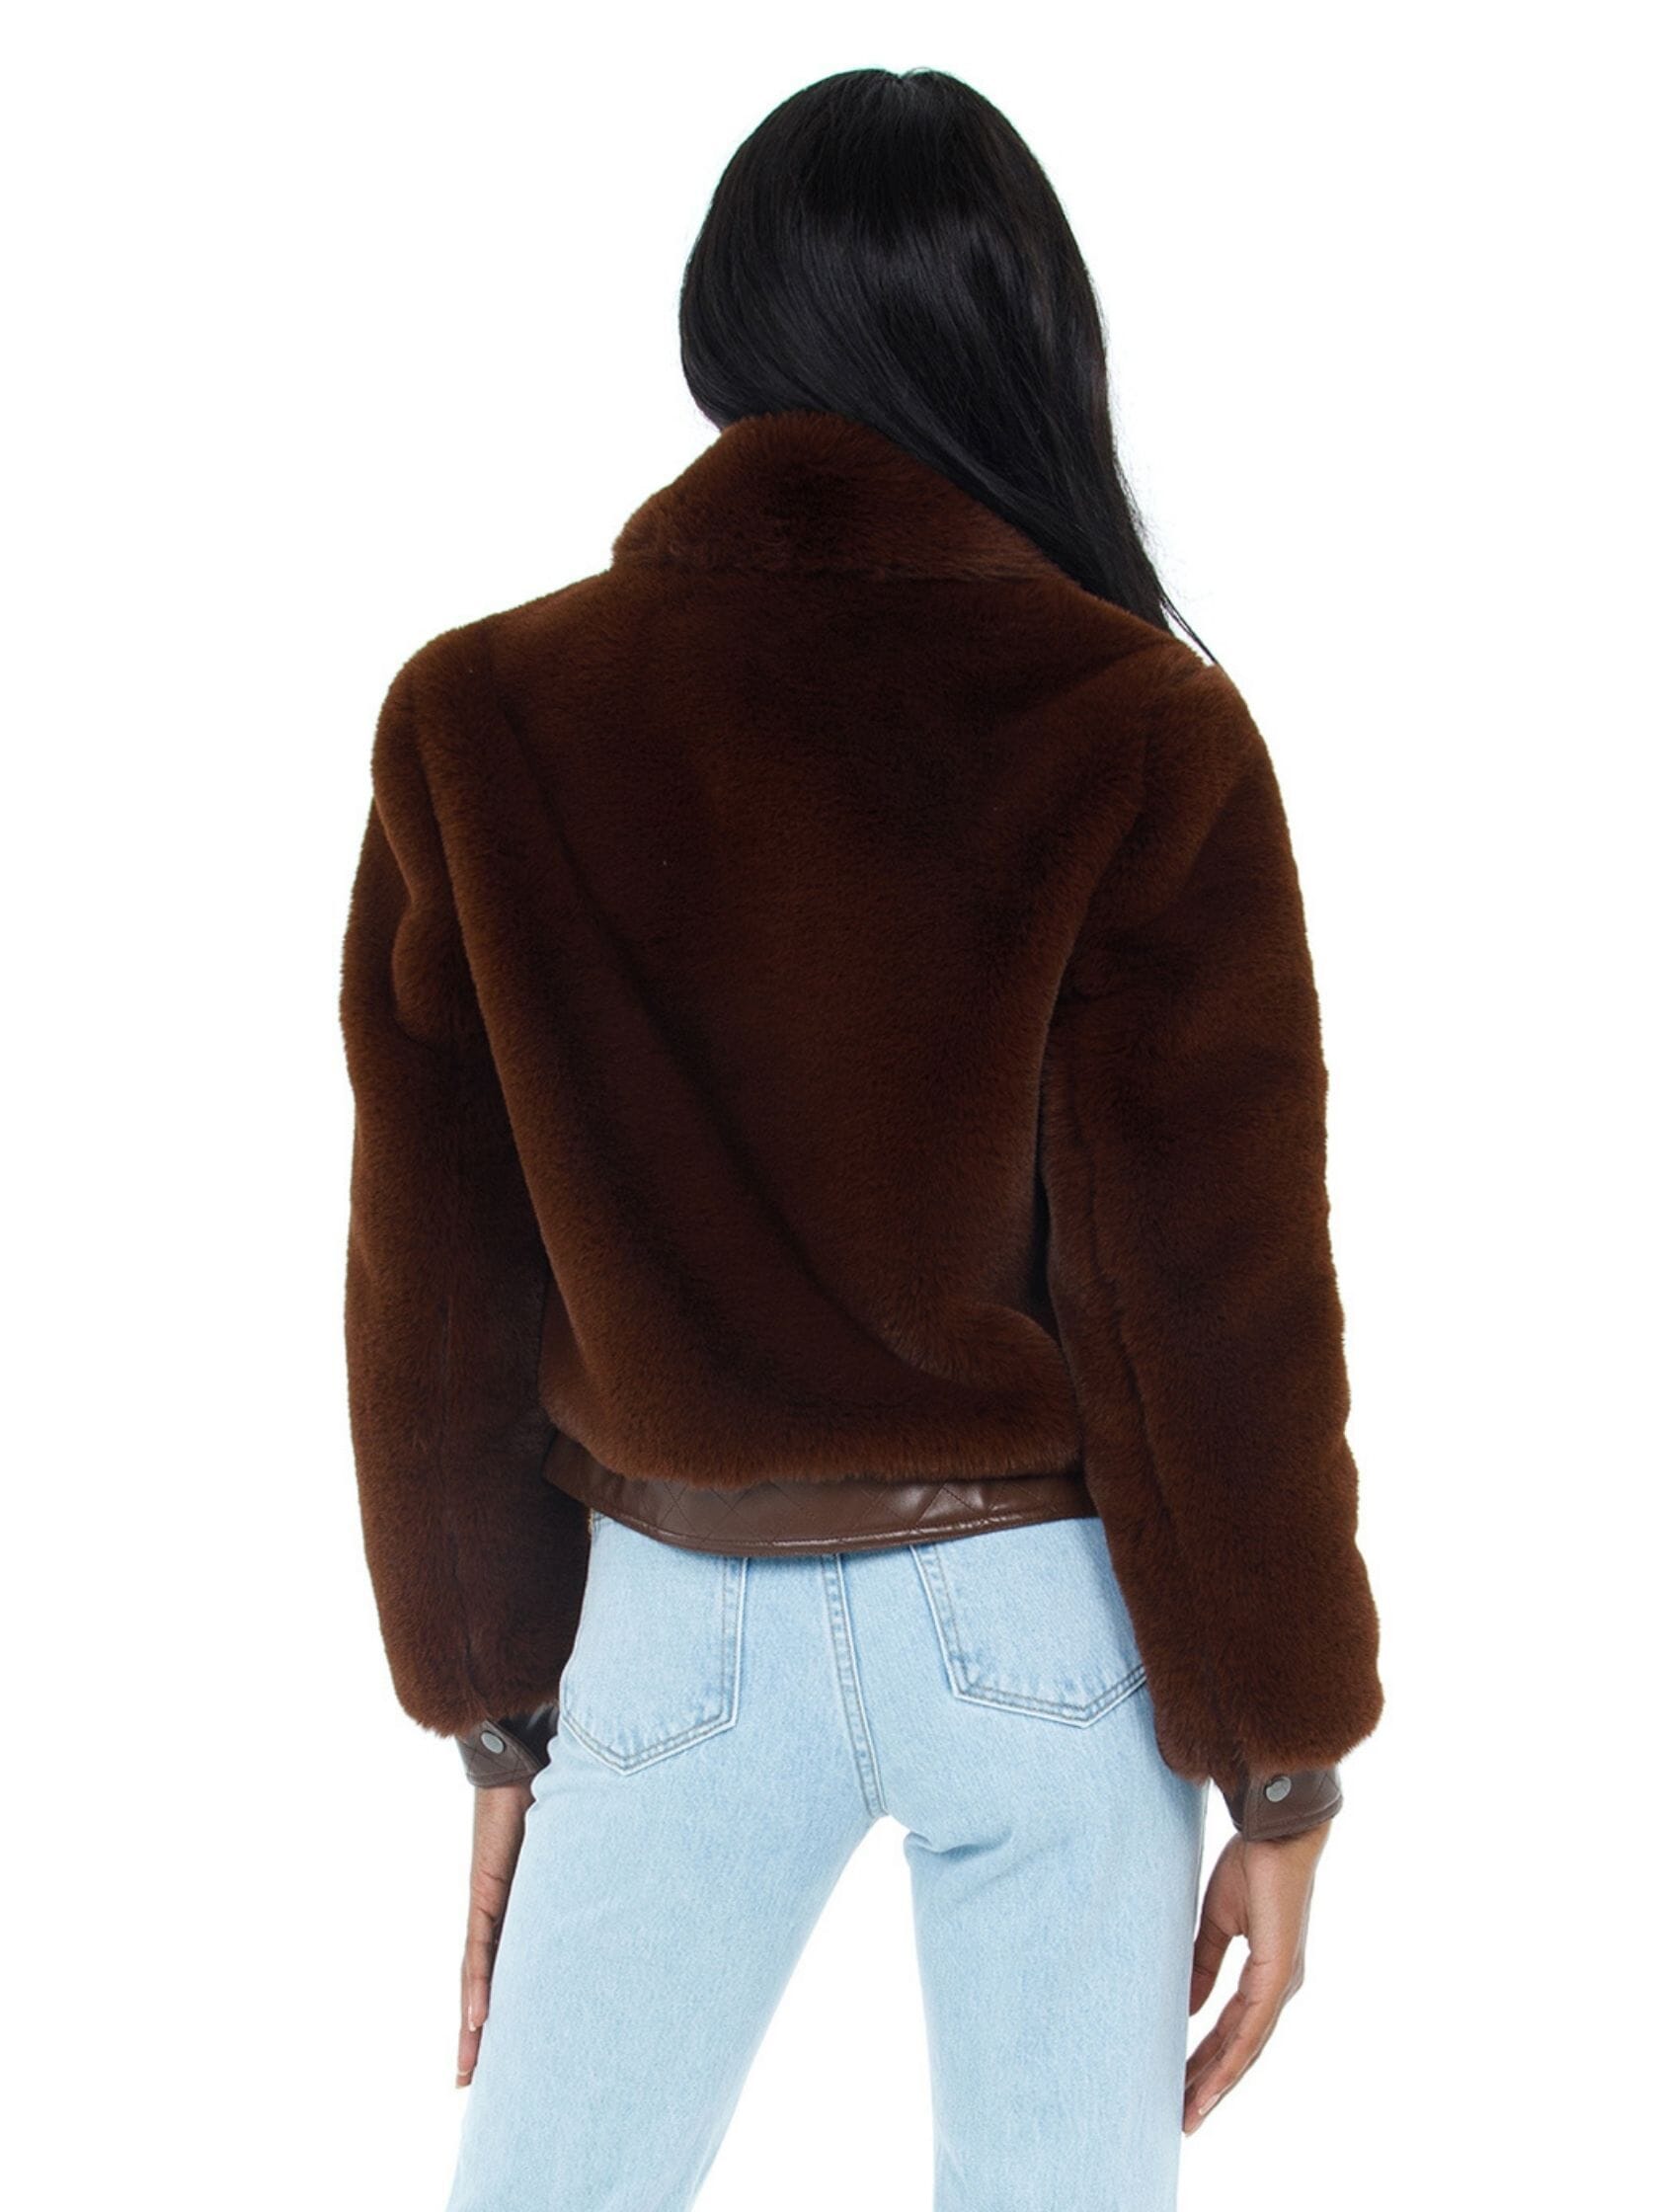 ASTR Patricia Jacket in Chocolate